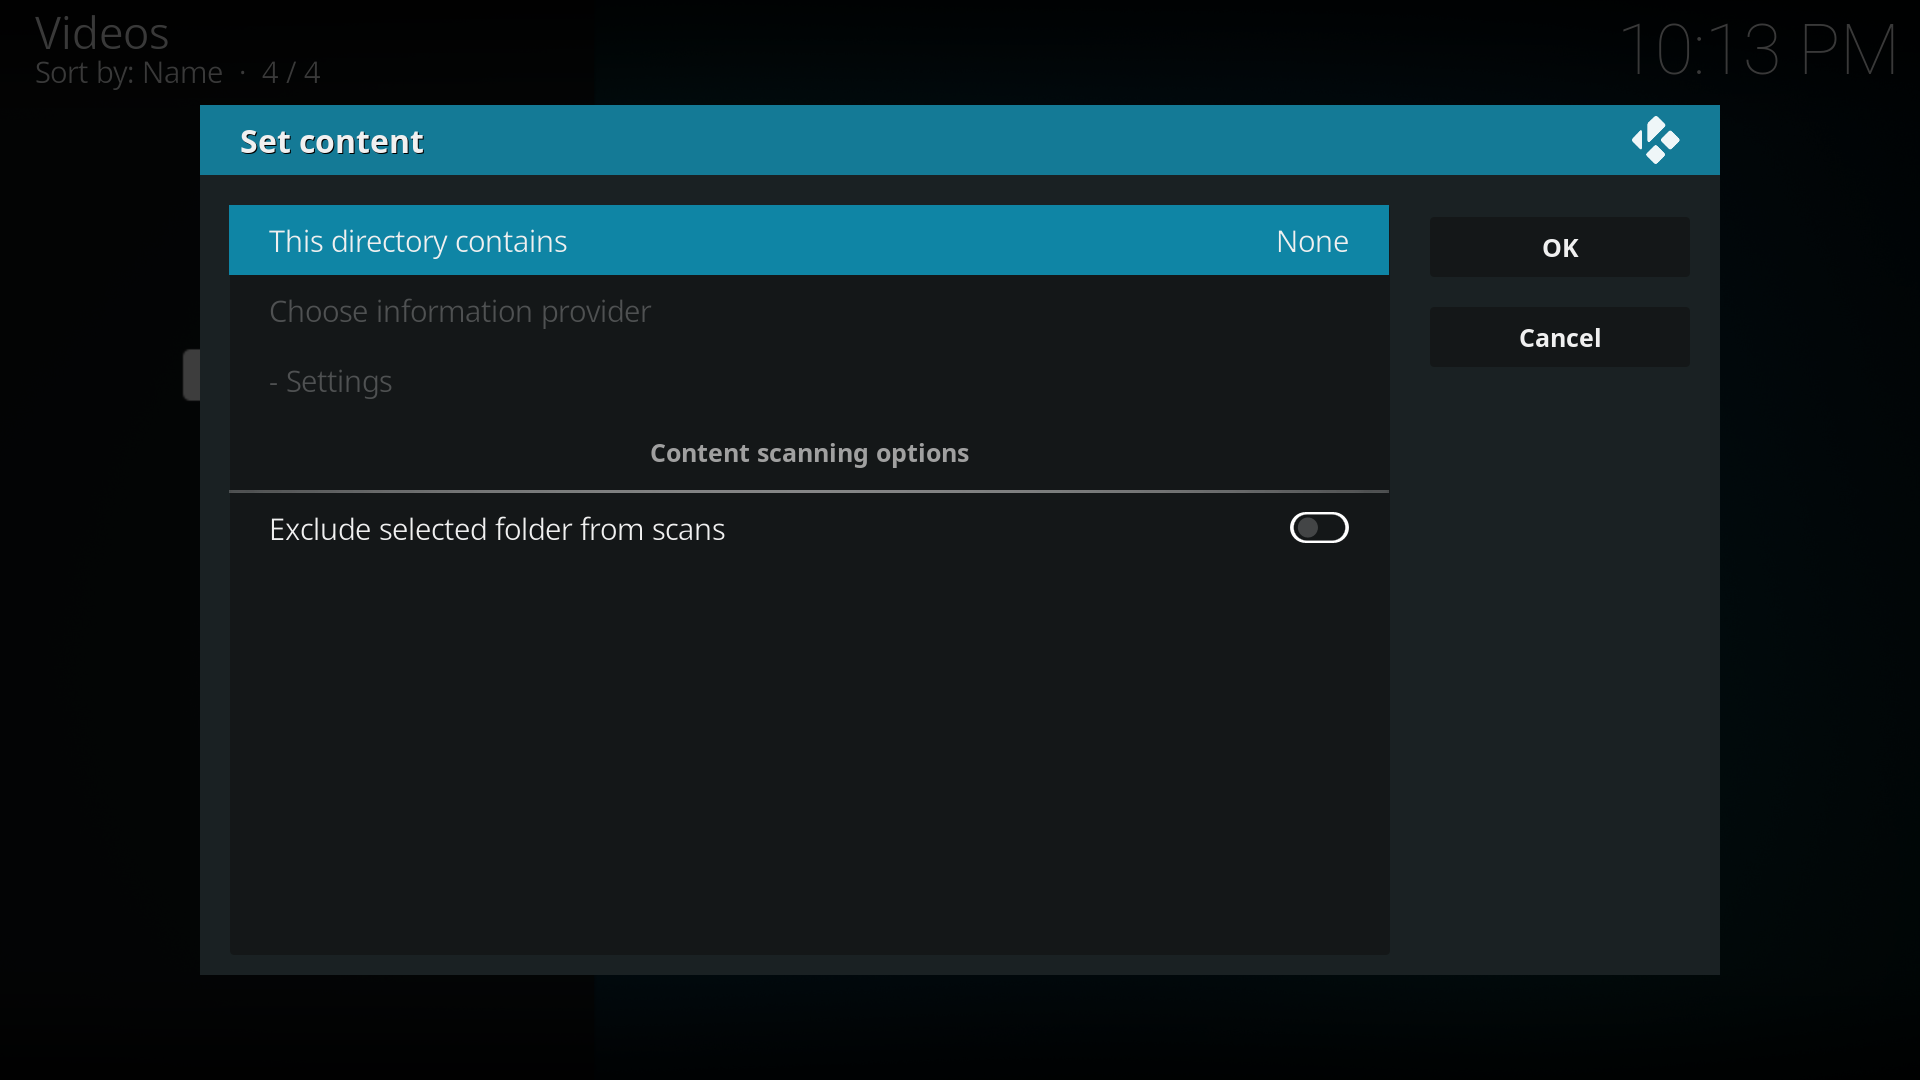 Step 7: The set content window will display, this is where you tell Kodi what type of media is in the folder. Select This directory contains and in the new window select the media type(in this example movies).